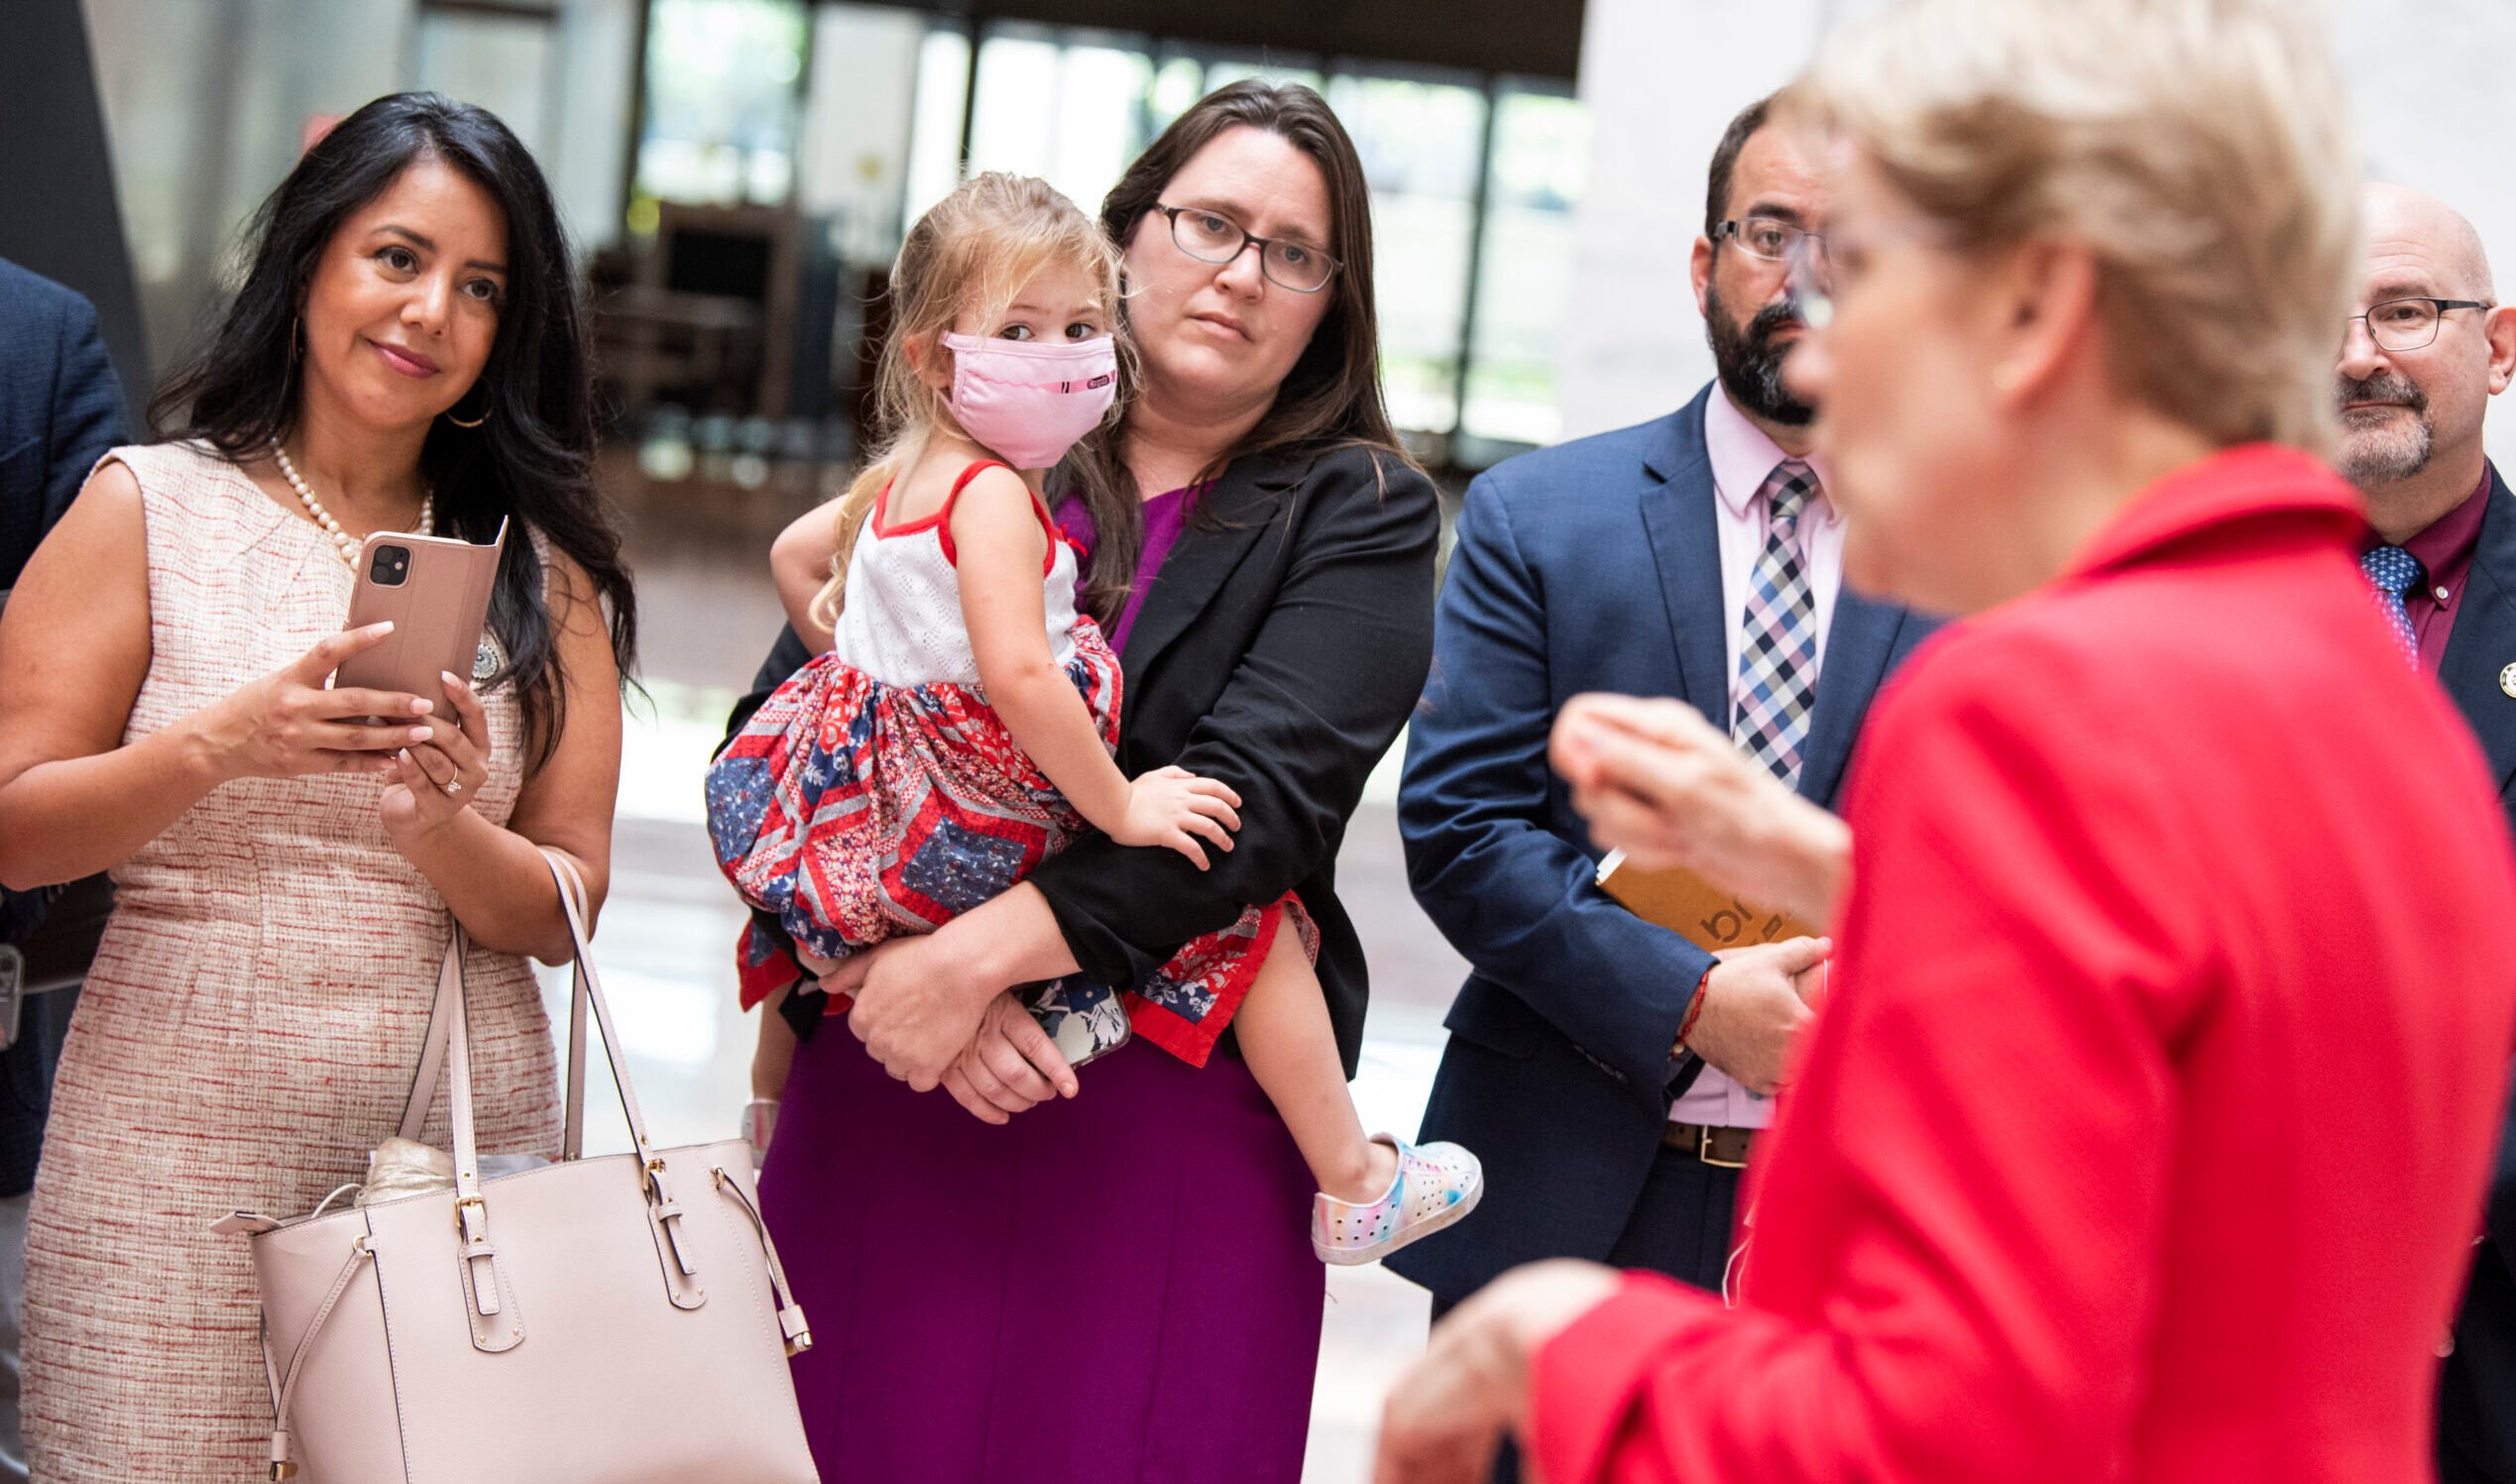 Erin Zwiener, a white woman with brown hair, holds her toddler daughter, wearing a mask, as she stands with other Democrats listening to Elizabeth Warren, who is wearing a red suit jacket and out of focus in the foreground.